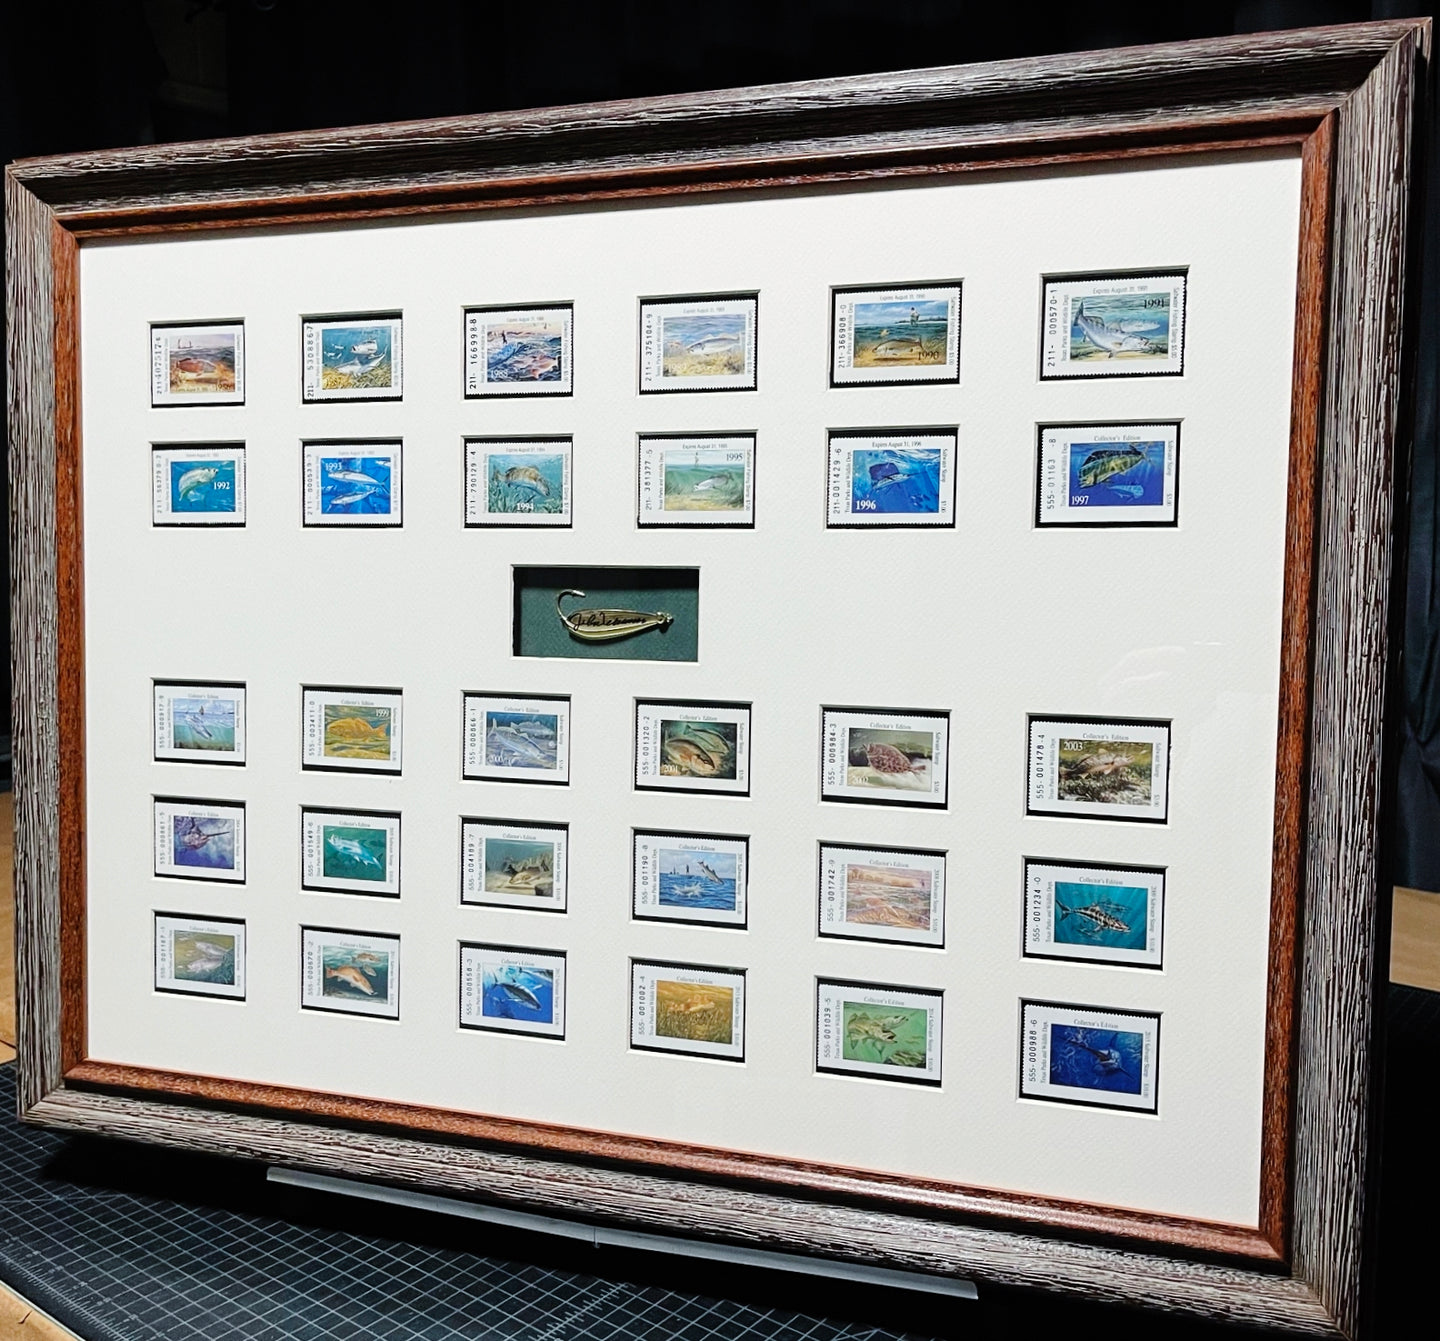 Texas Saltwater TPWD Stamps Complete Set 1986 To 2015 Shadow Box With Gold Spoon - Brand New Custom Sporting Frame